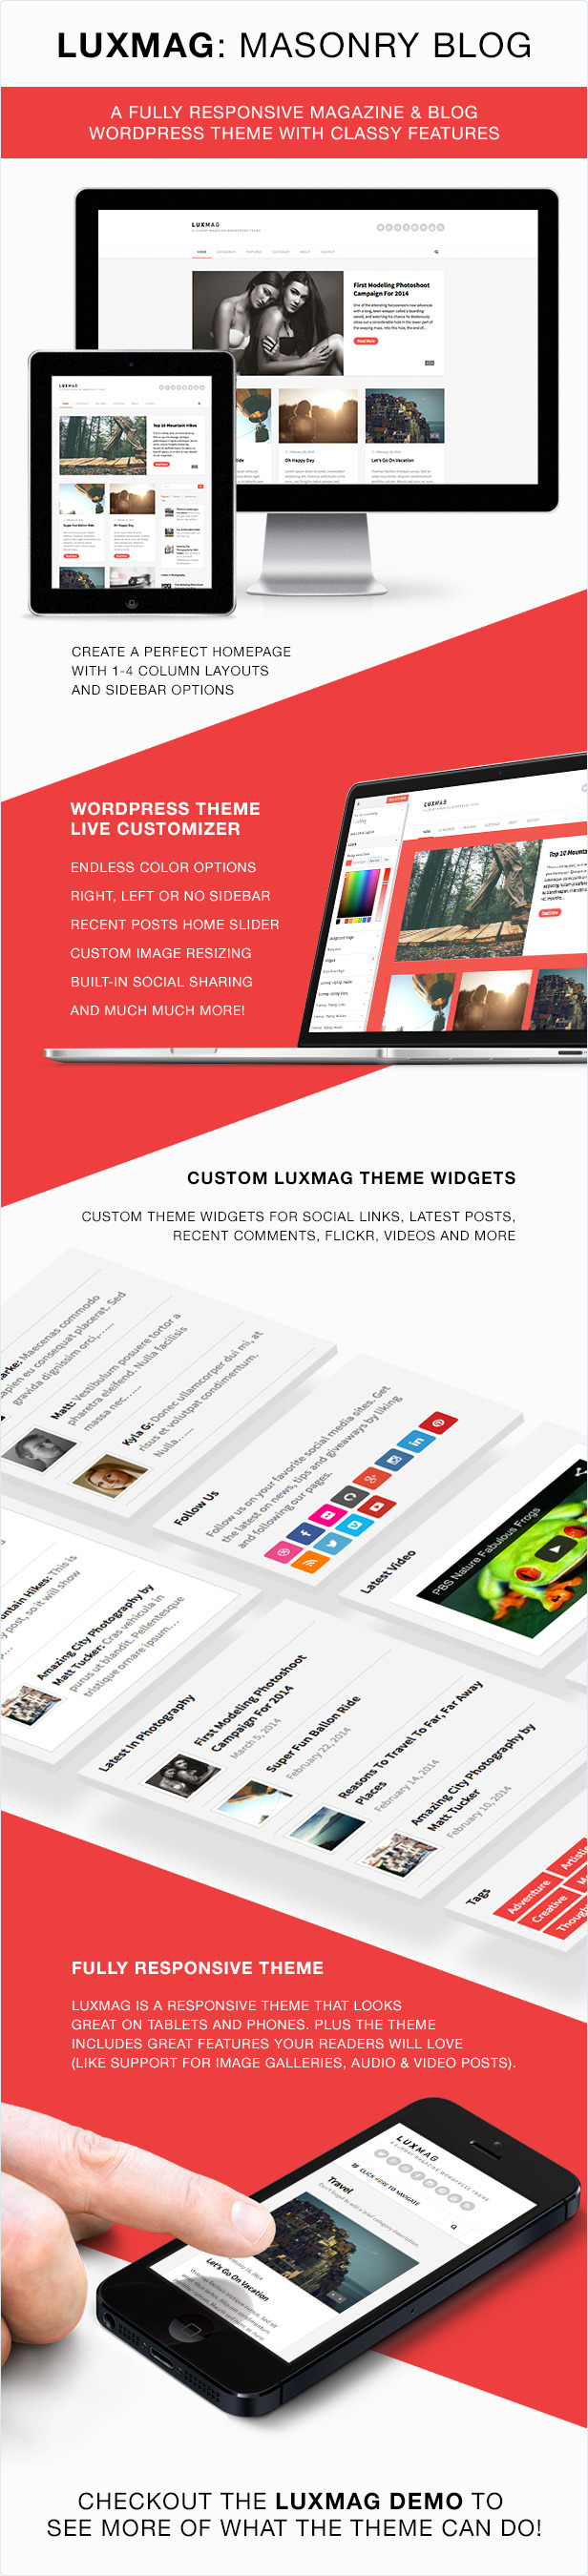 Luxmag WordPress Theme Features By WPExplorer On Dribbble